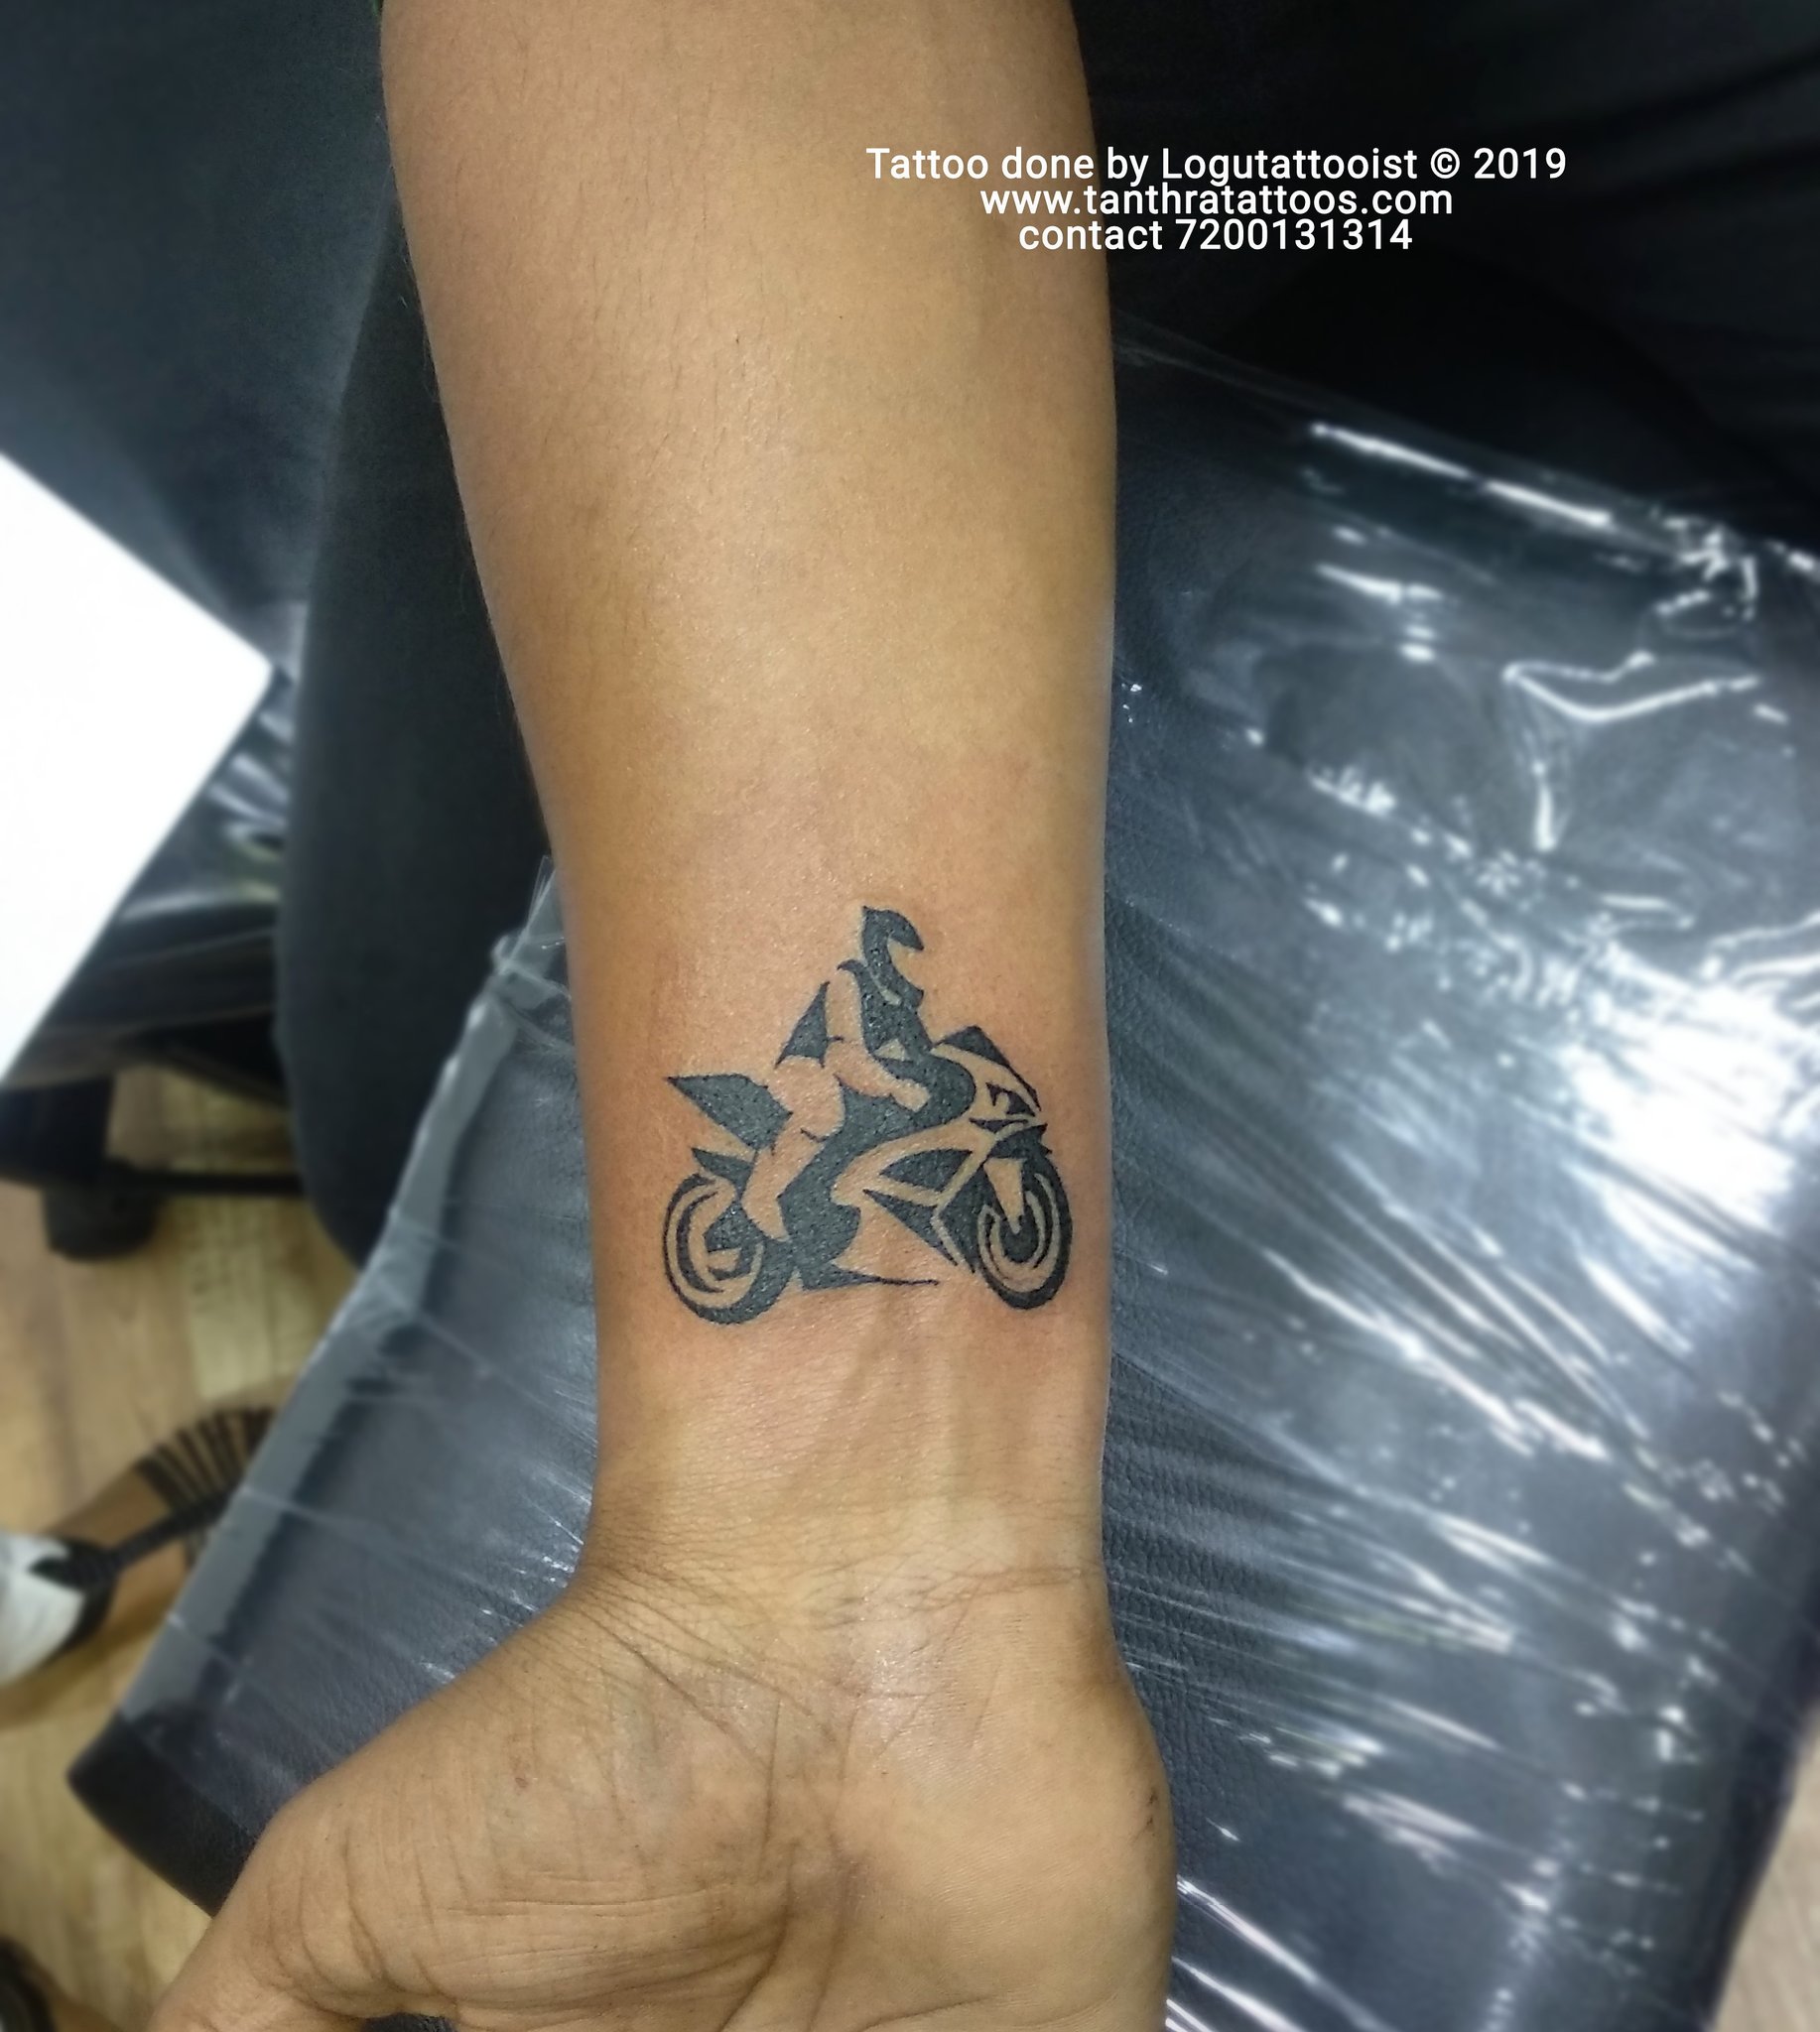 Iron Clad Tattoos 5901 Andrews Road Mentor on the Lake Reviews and  Appointments  GetInked